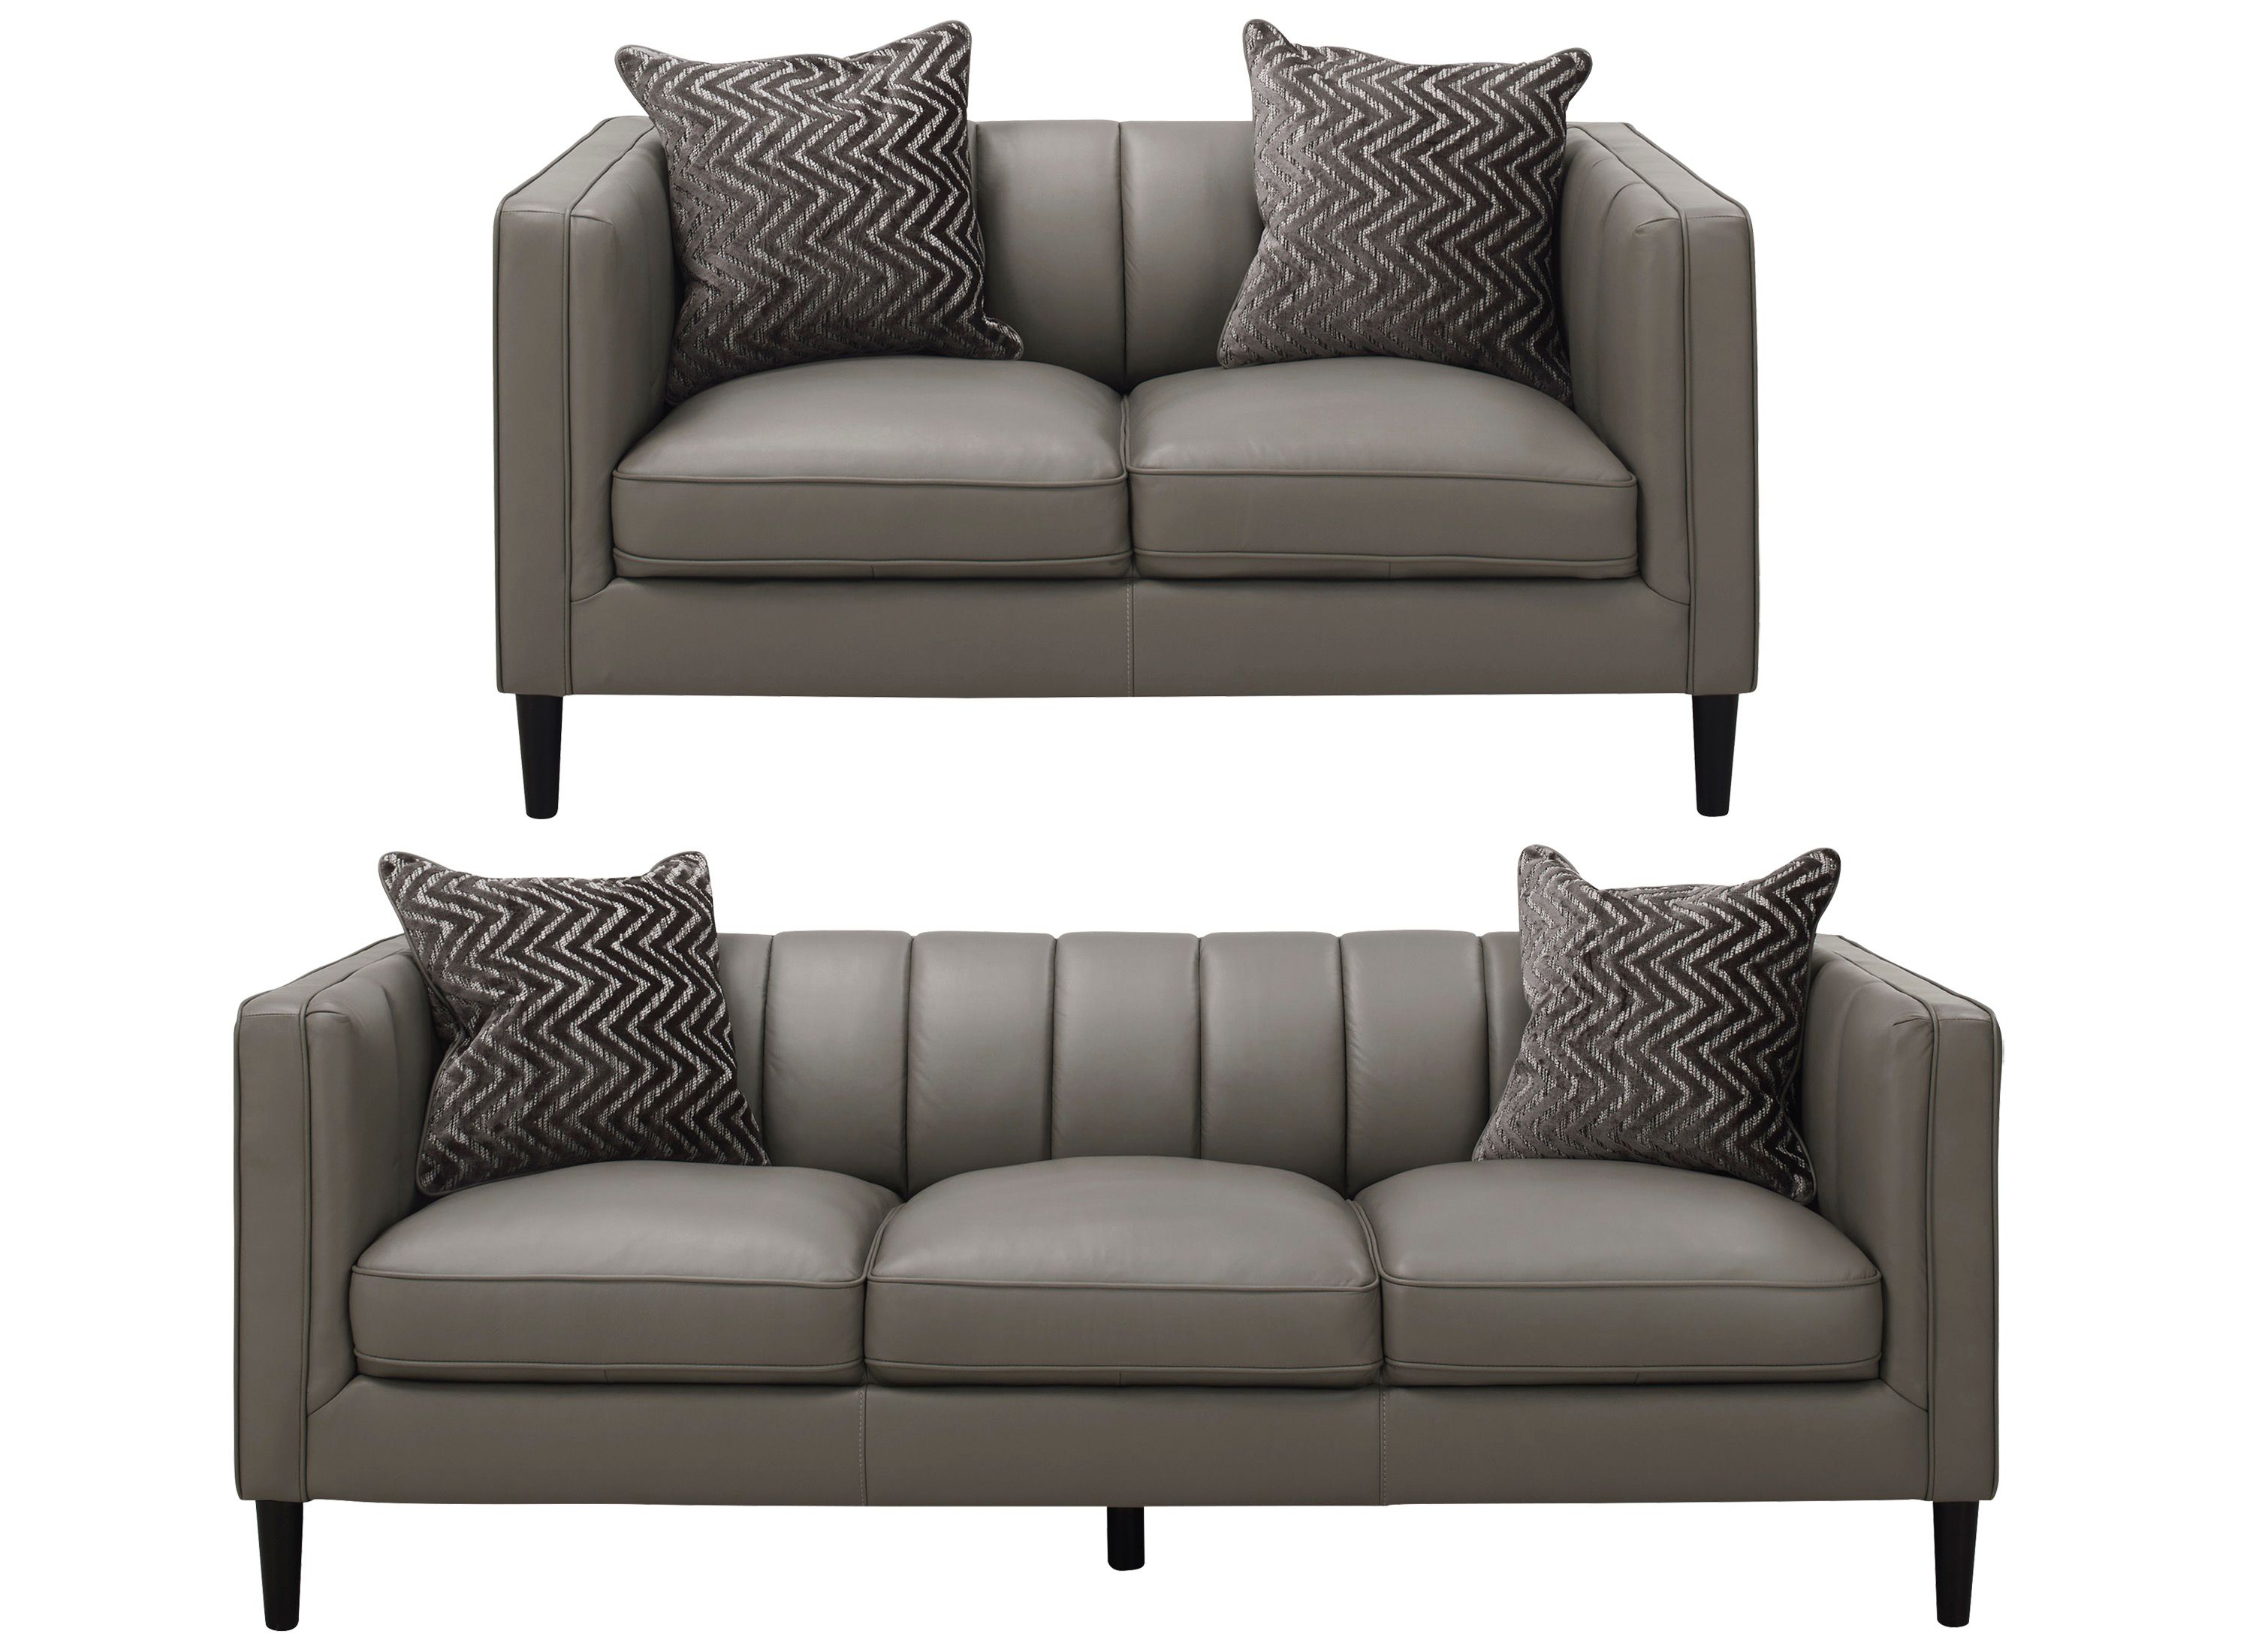 Hutton Leather 2-pc. Sofa and Loveseat Set